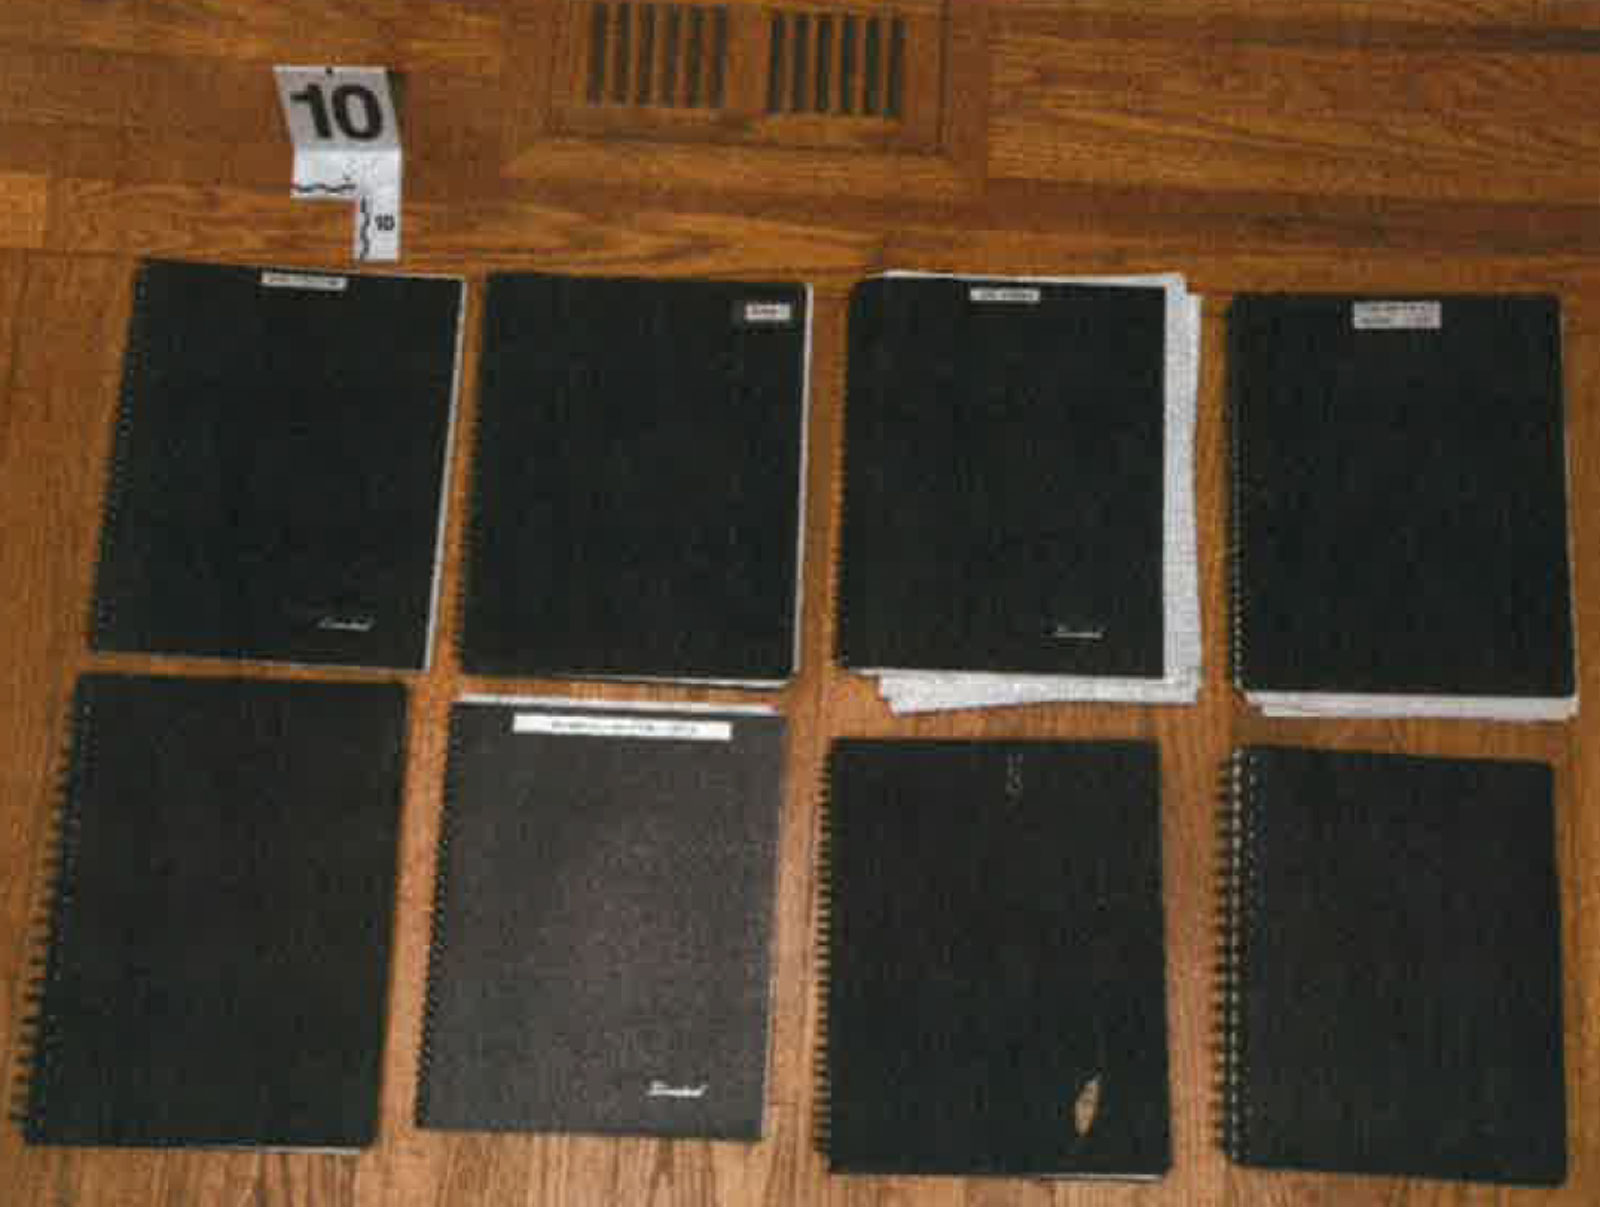 From page 80, notebooks seized from a file cabinet under a television in Delaware home office.